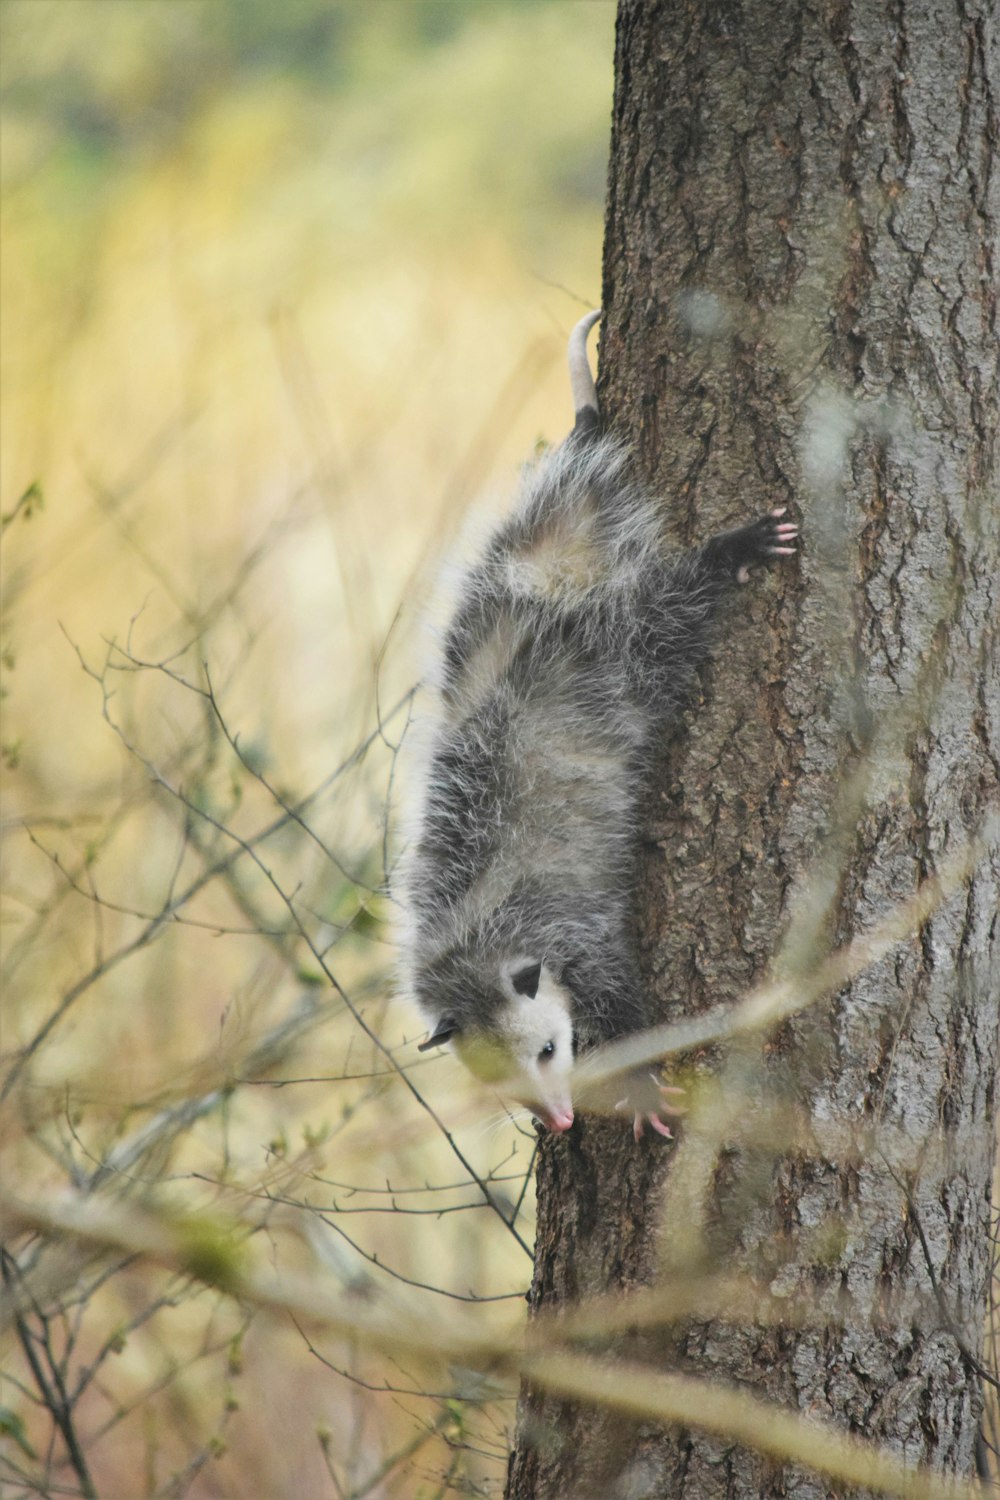 a small animal climbing up the side of a tree